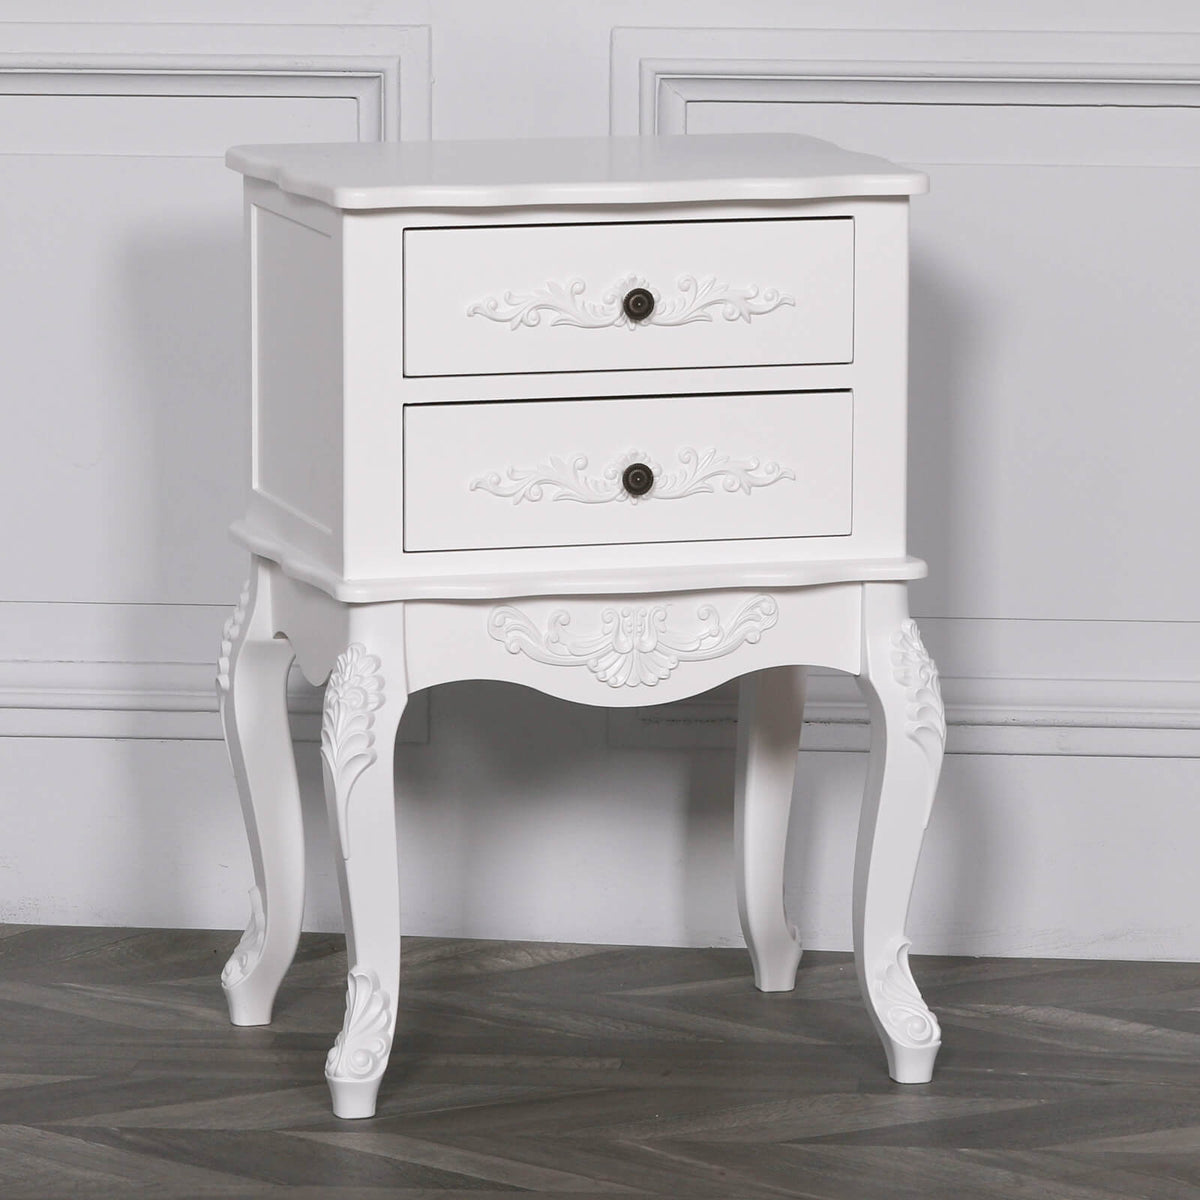 French bedside tables for sale french style bedside table uk vintage french bedside table pair white french bedside table for sale uk buy french bedside tables uk french shabby chic bedside tables white uk online with drawers